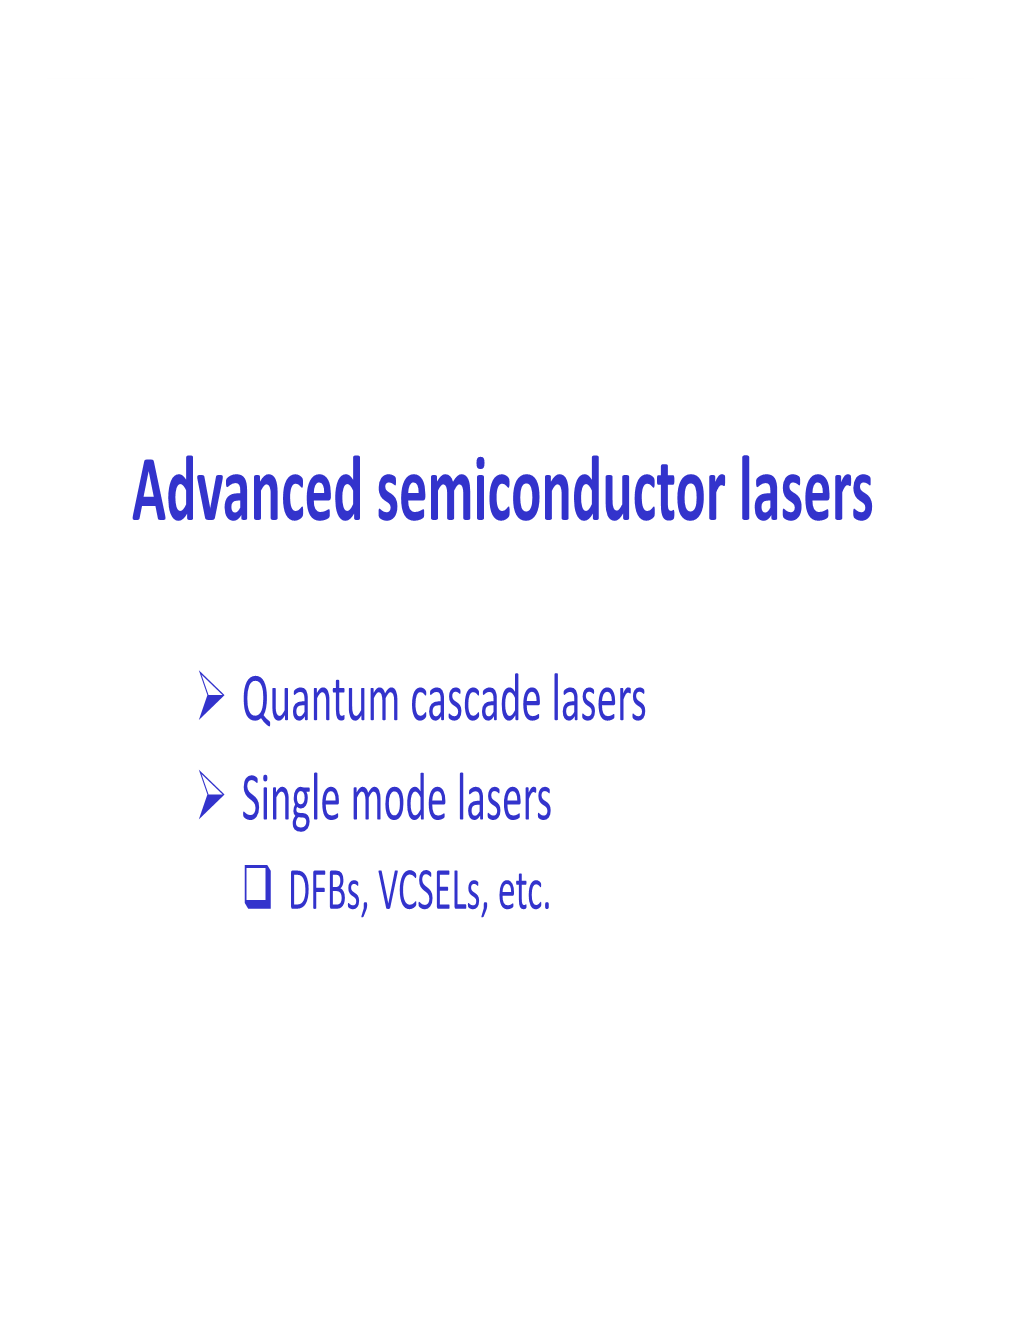 Advanced Semiconductor Lasers